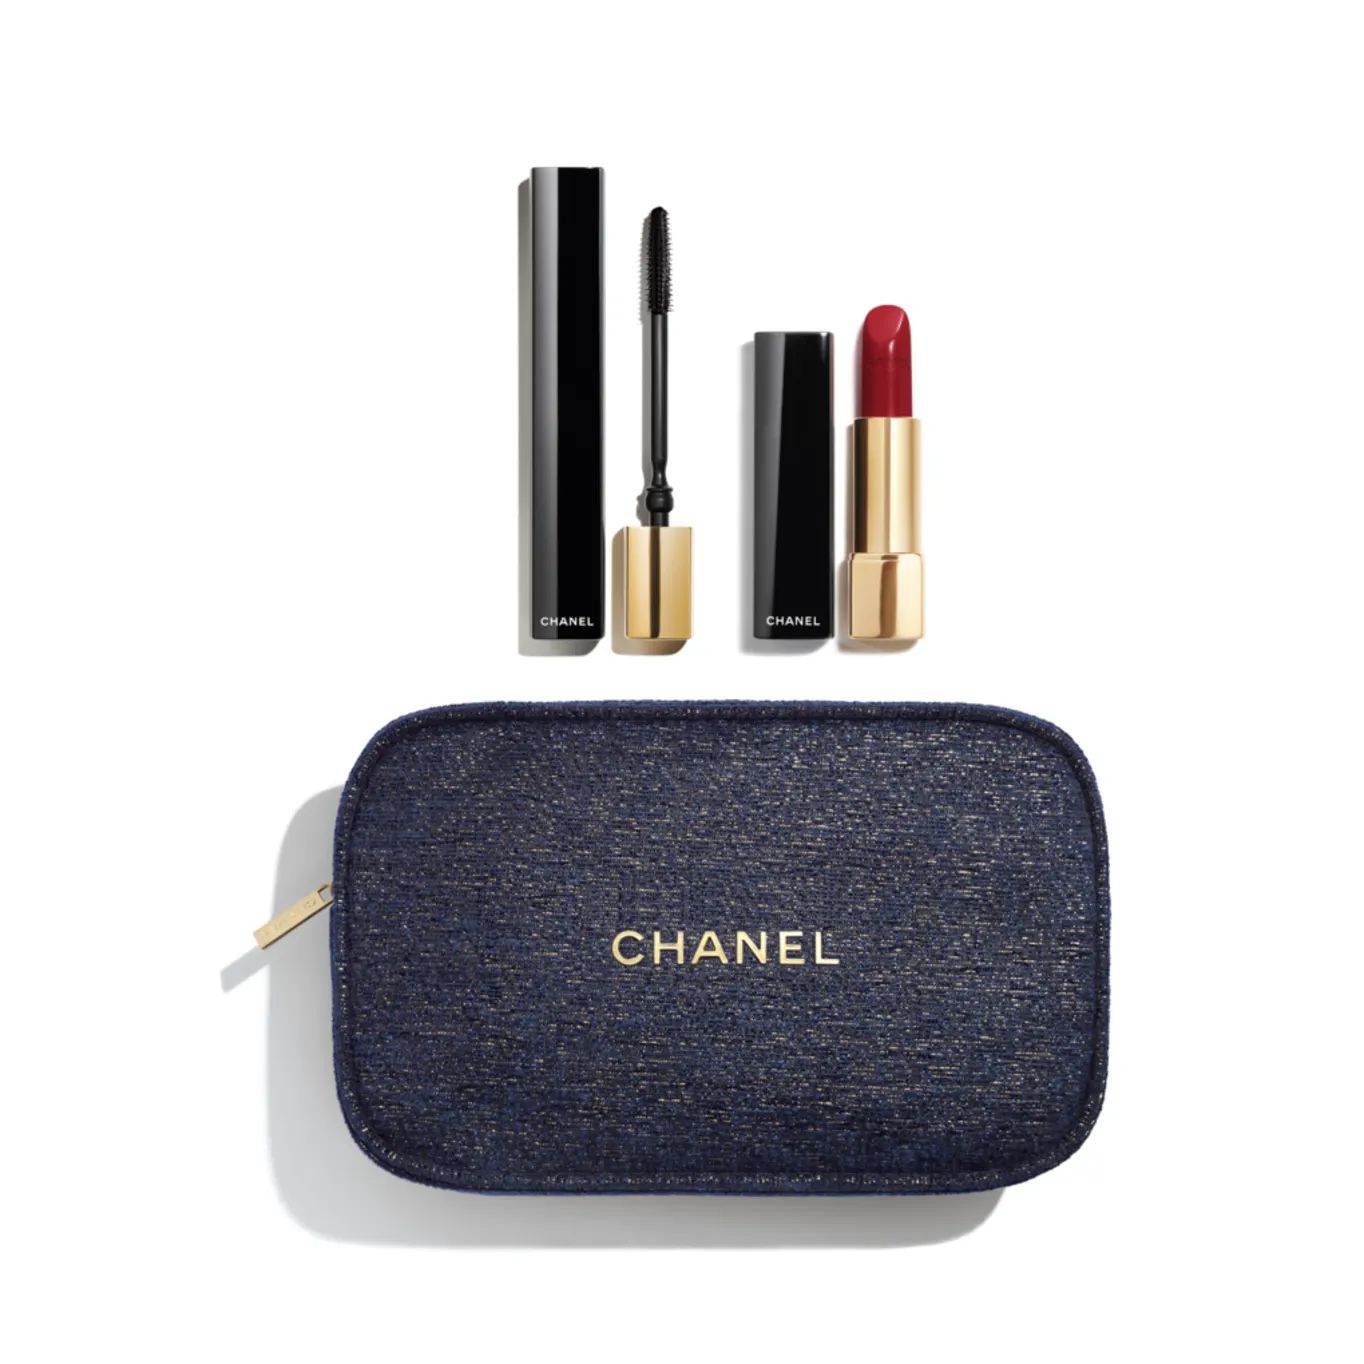 ABSOLUTE ALLURE Makeup set  | CHANEL | Chanel, Inc. (US)